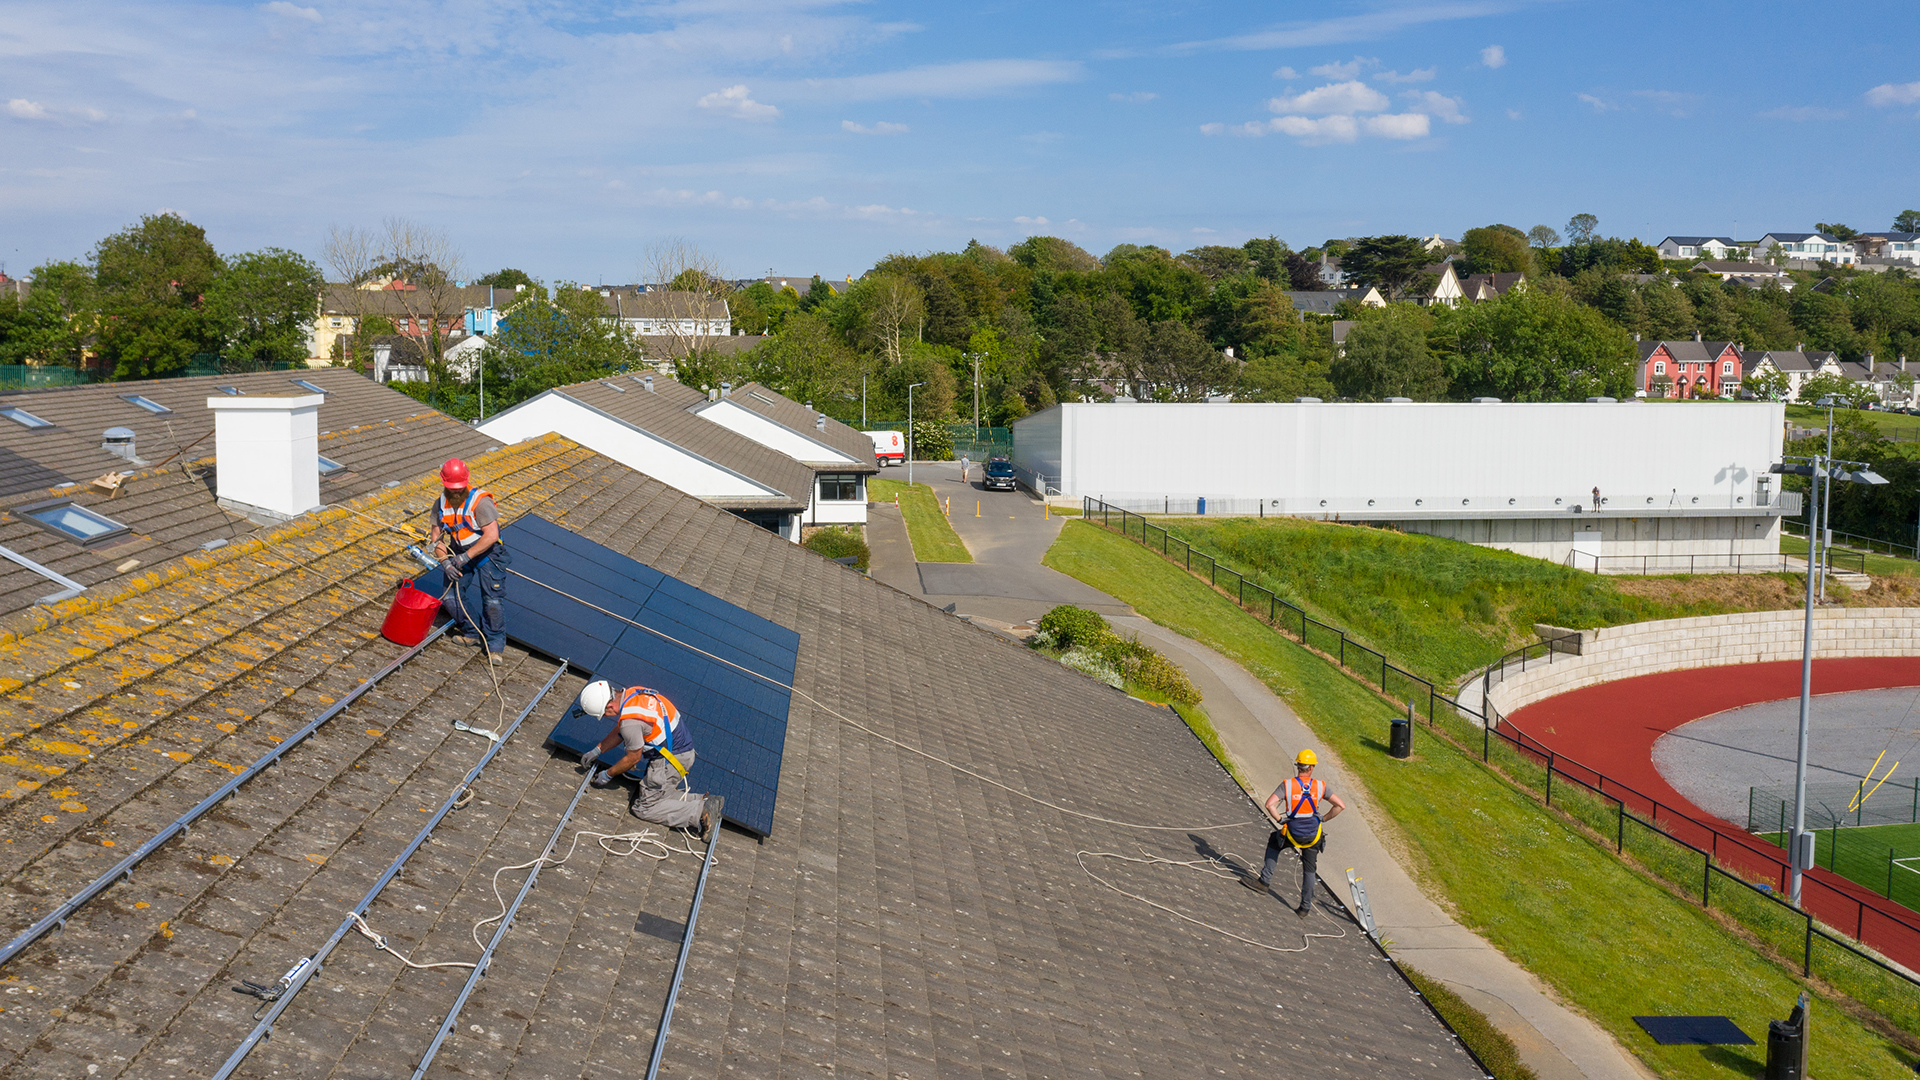 SSE Airtricity employees install solar panels on the roof